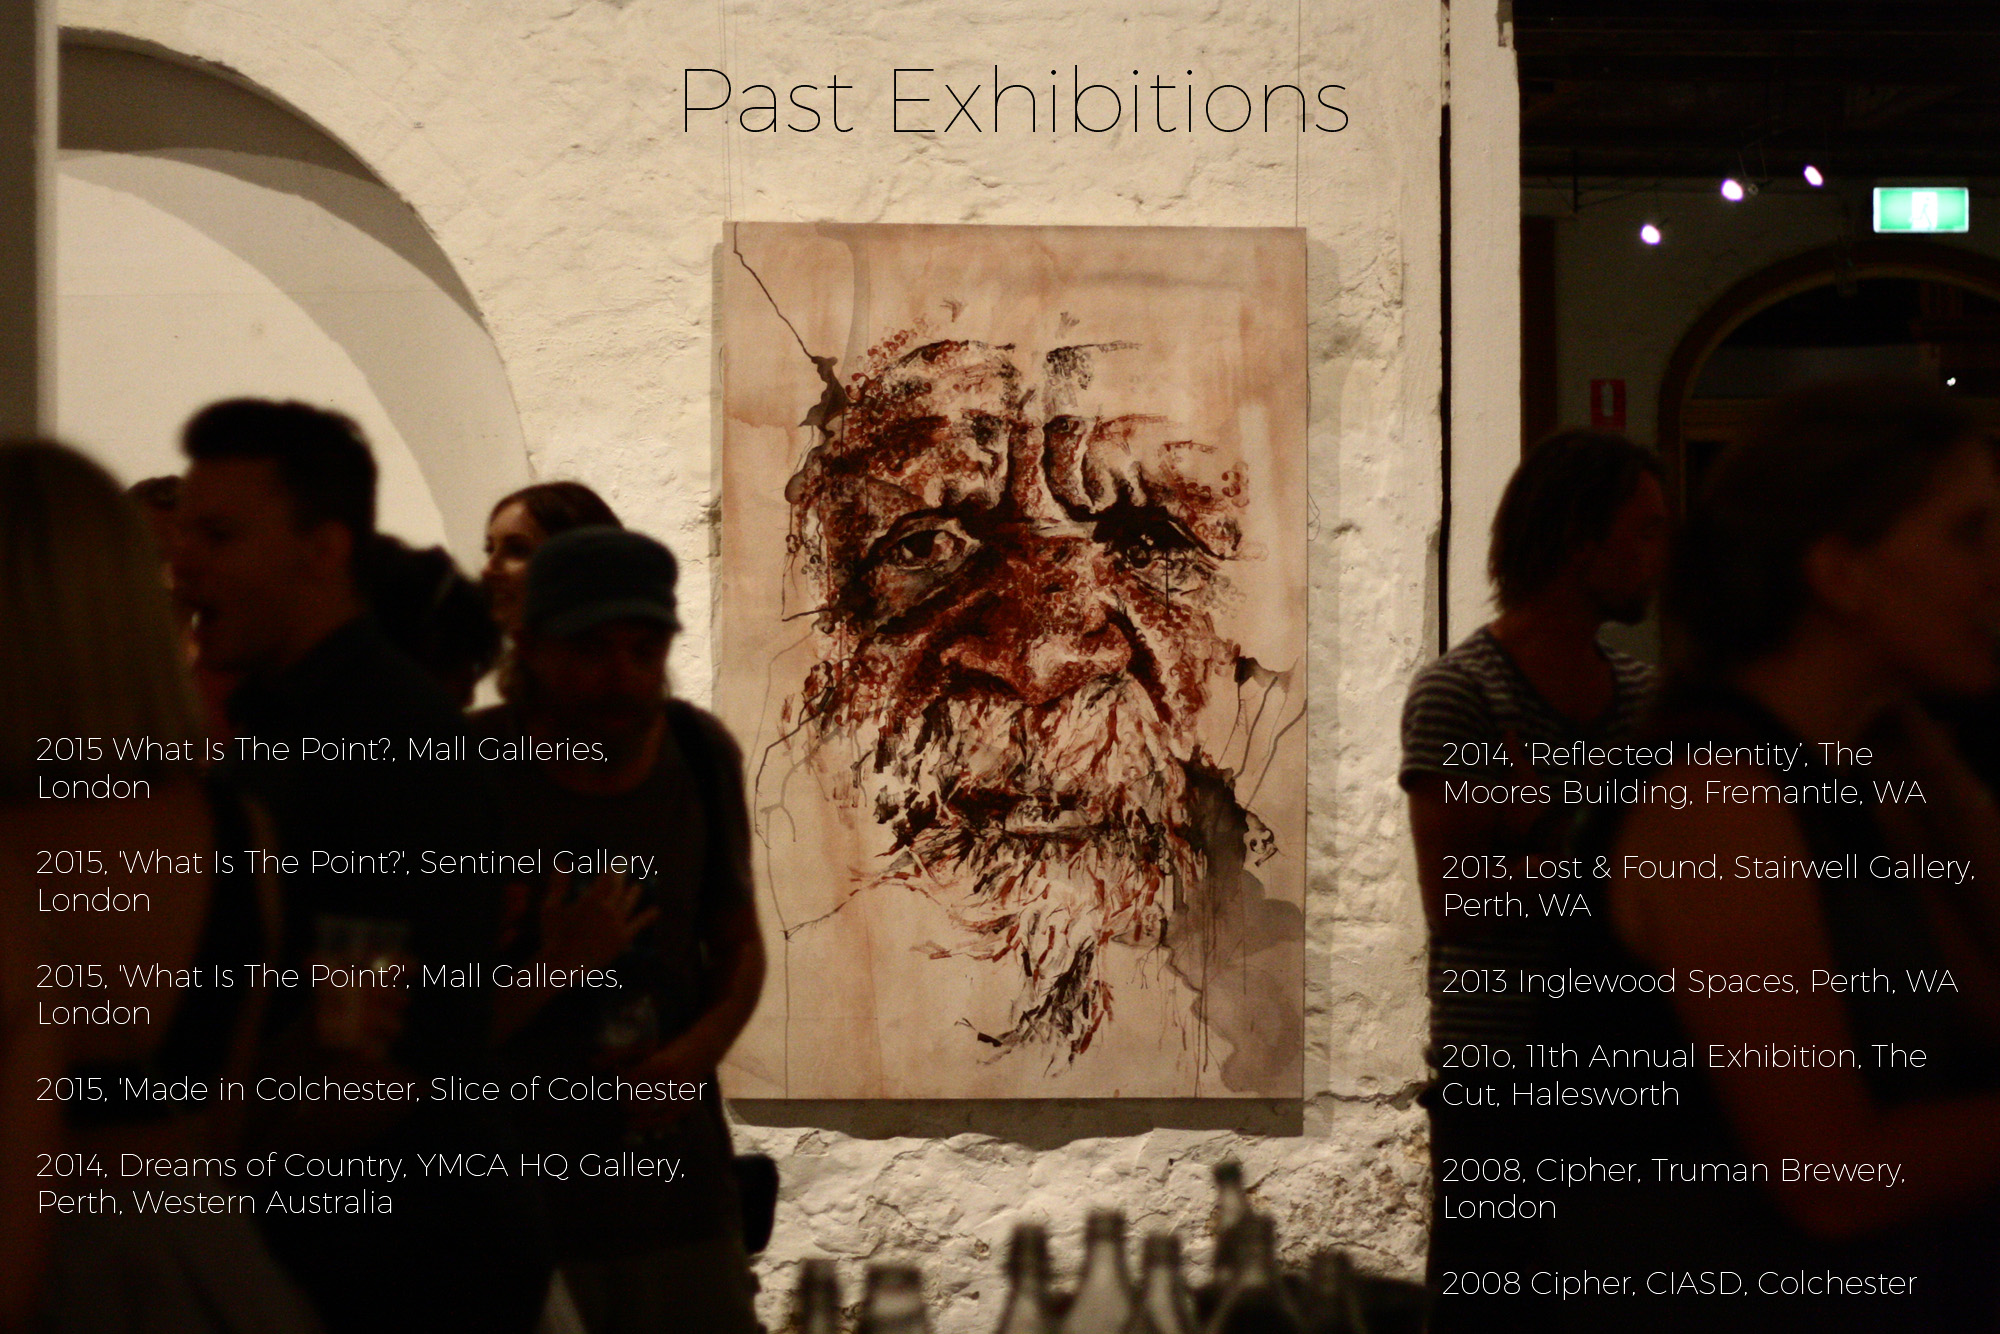 Past exhibitions page